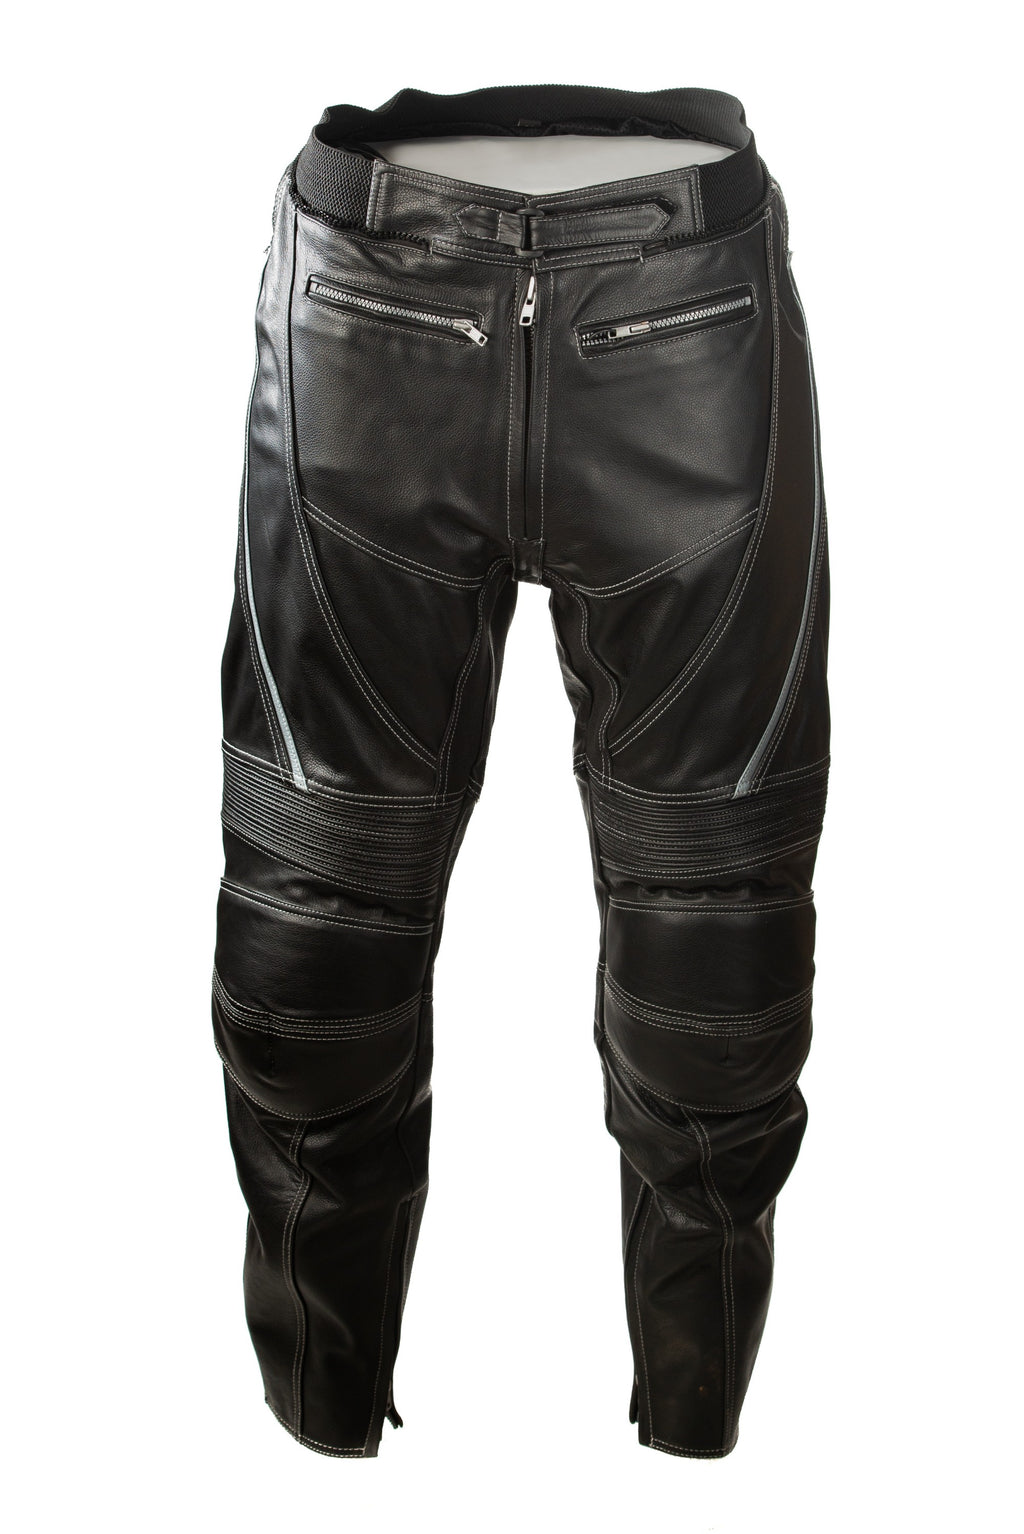 Details 79+ armoured motorcycle trousers super hot - in.cdgdbentre